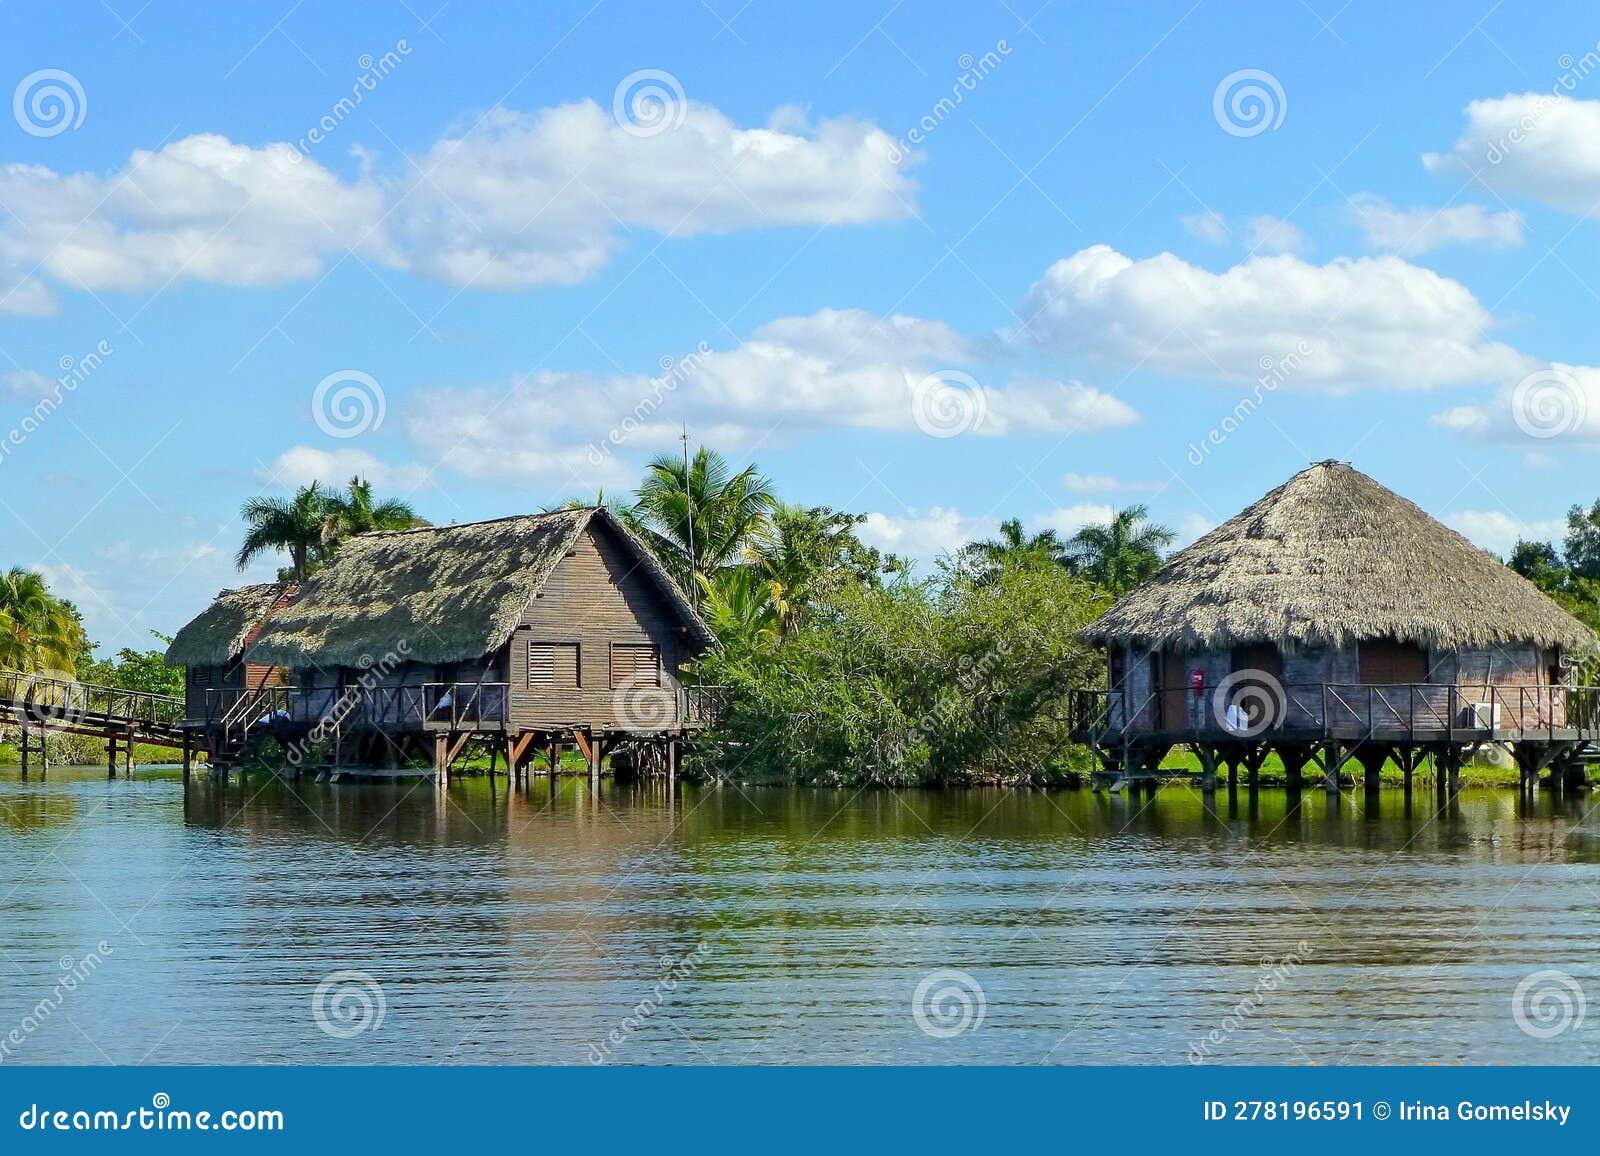 view of the tourist complex in the form of the indian village of guama in the zapata national park, cuba